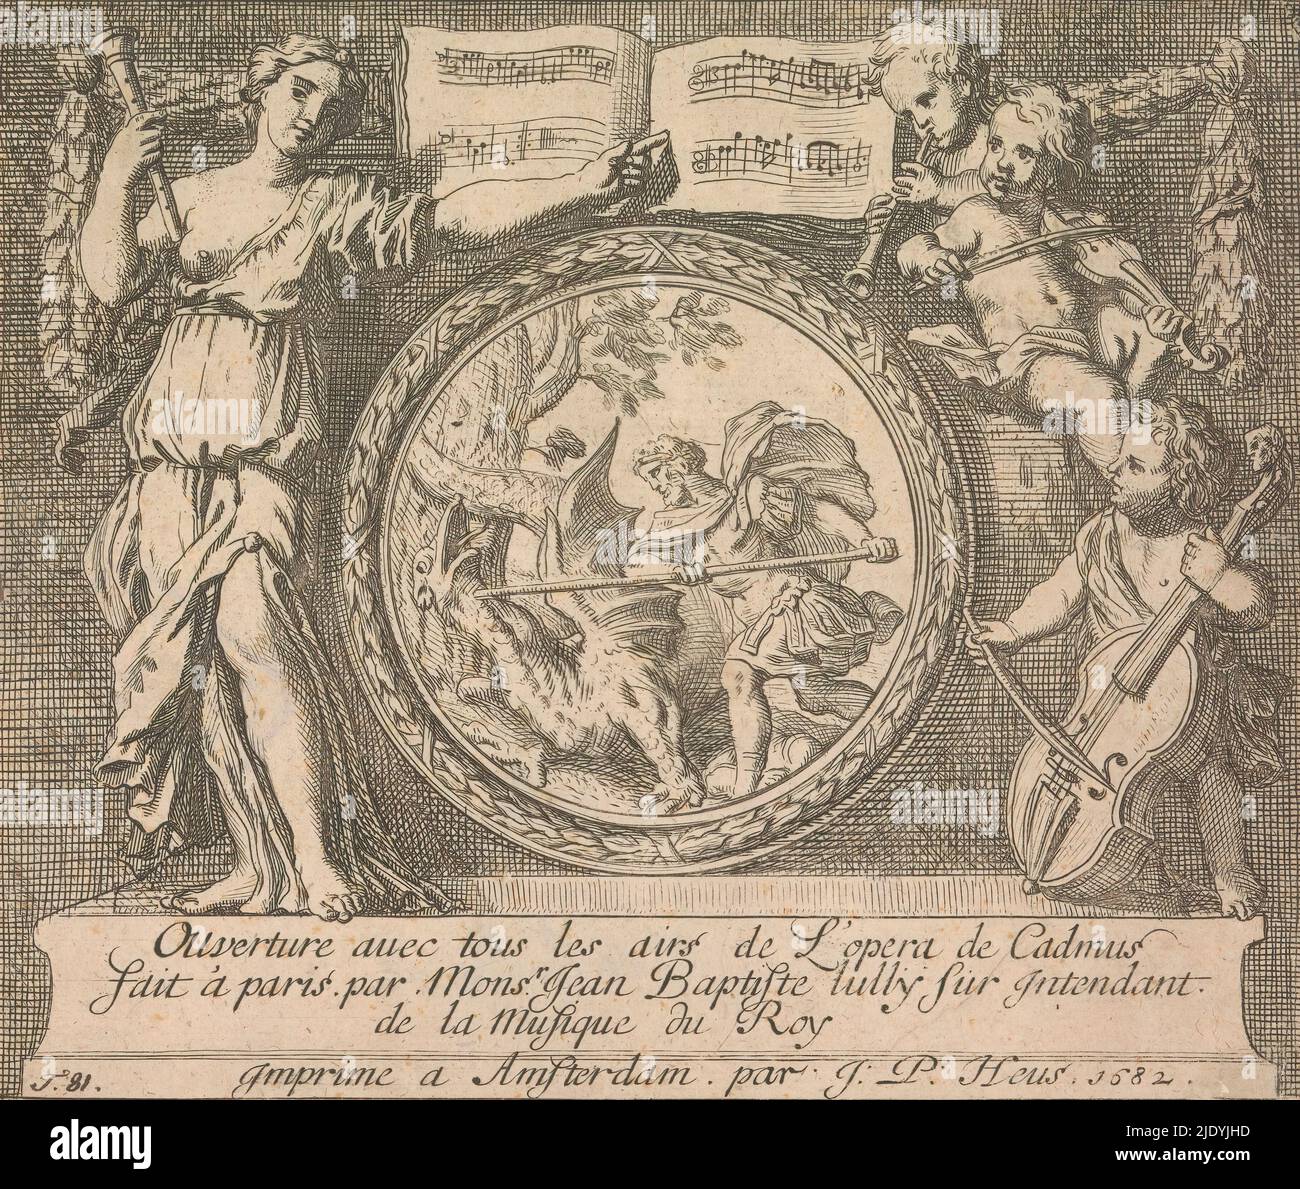 Cadmus slays the dragon, Cadmus slays the dragon that devoured his companions. The mythological representation is framed in a medallion-shaped frame. On the left, a woman with a flute points to sheet music above the frame. To the right, three putti play various instruments. At the bottom of the print is a three-line caption in French., print maker: Gerard de Lairesse, publisher: Jean Philip Heus, (mentioned on object), Amsterdam, 1682, paper, etching, height 154 mm × width 183 mm Stock Photo